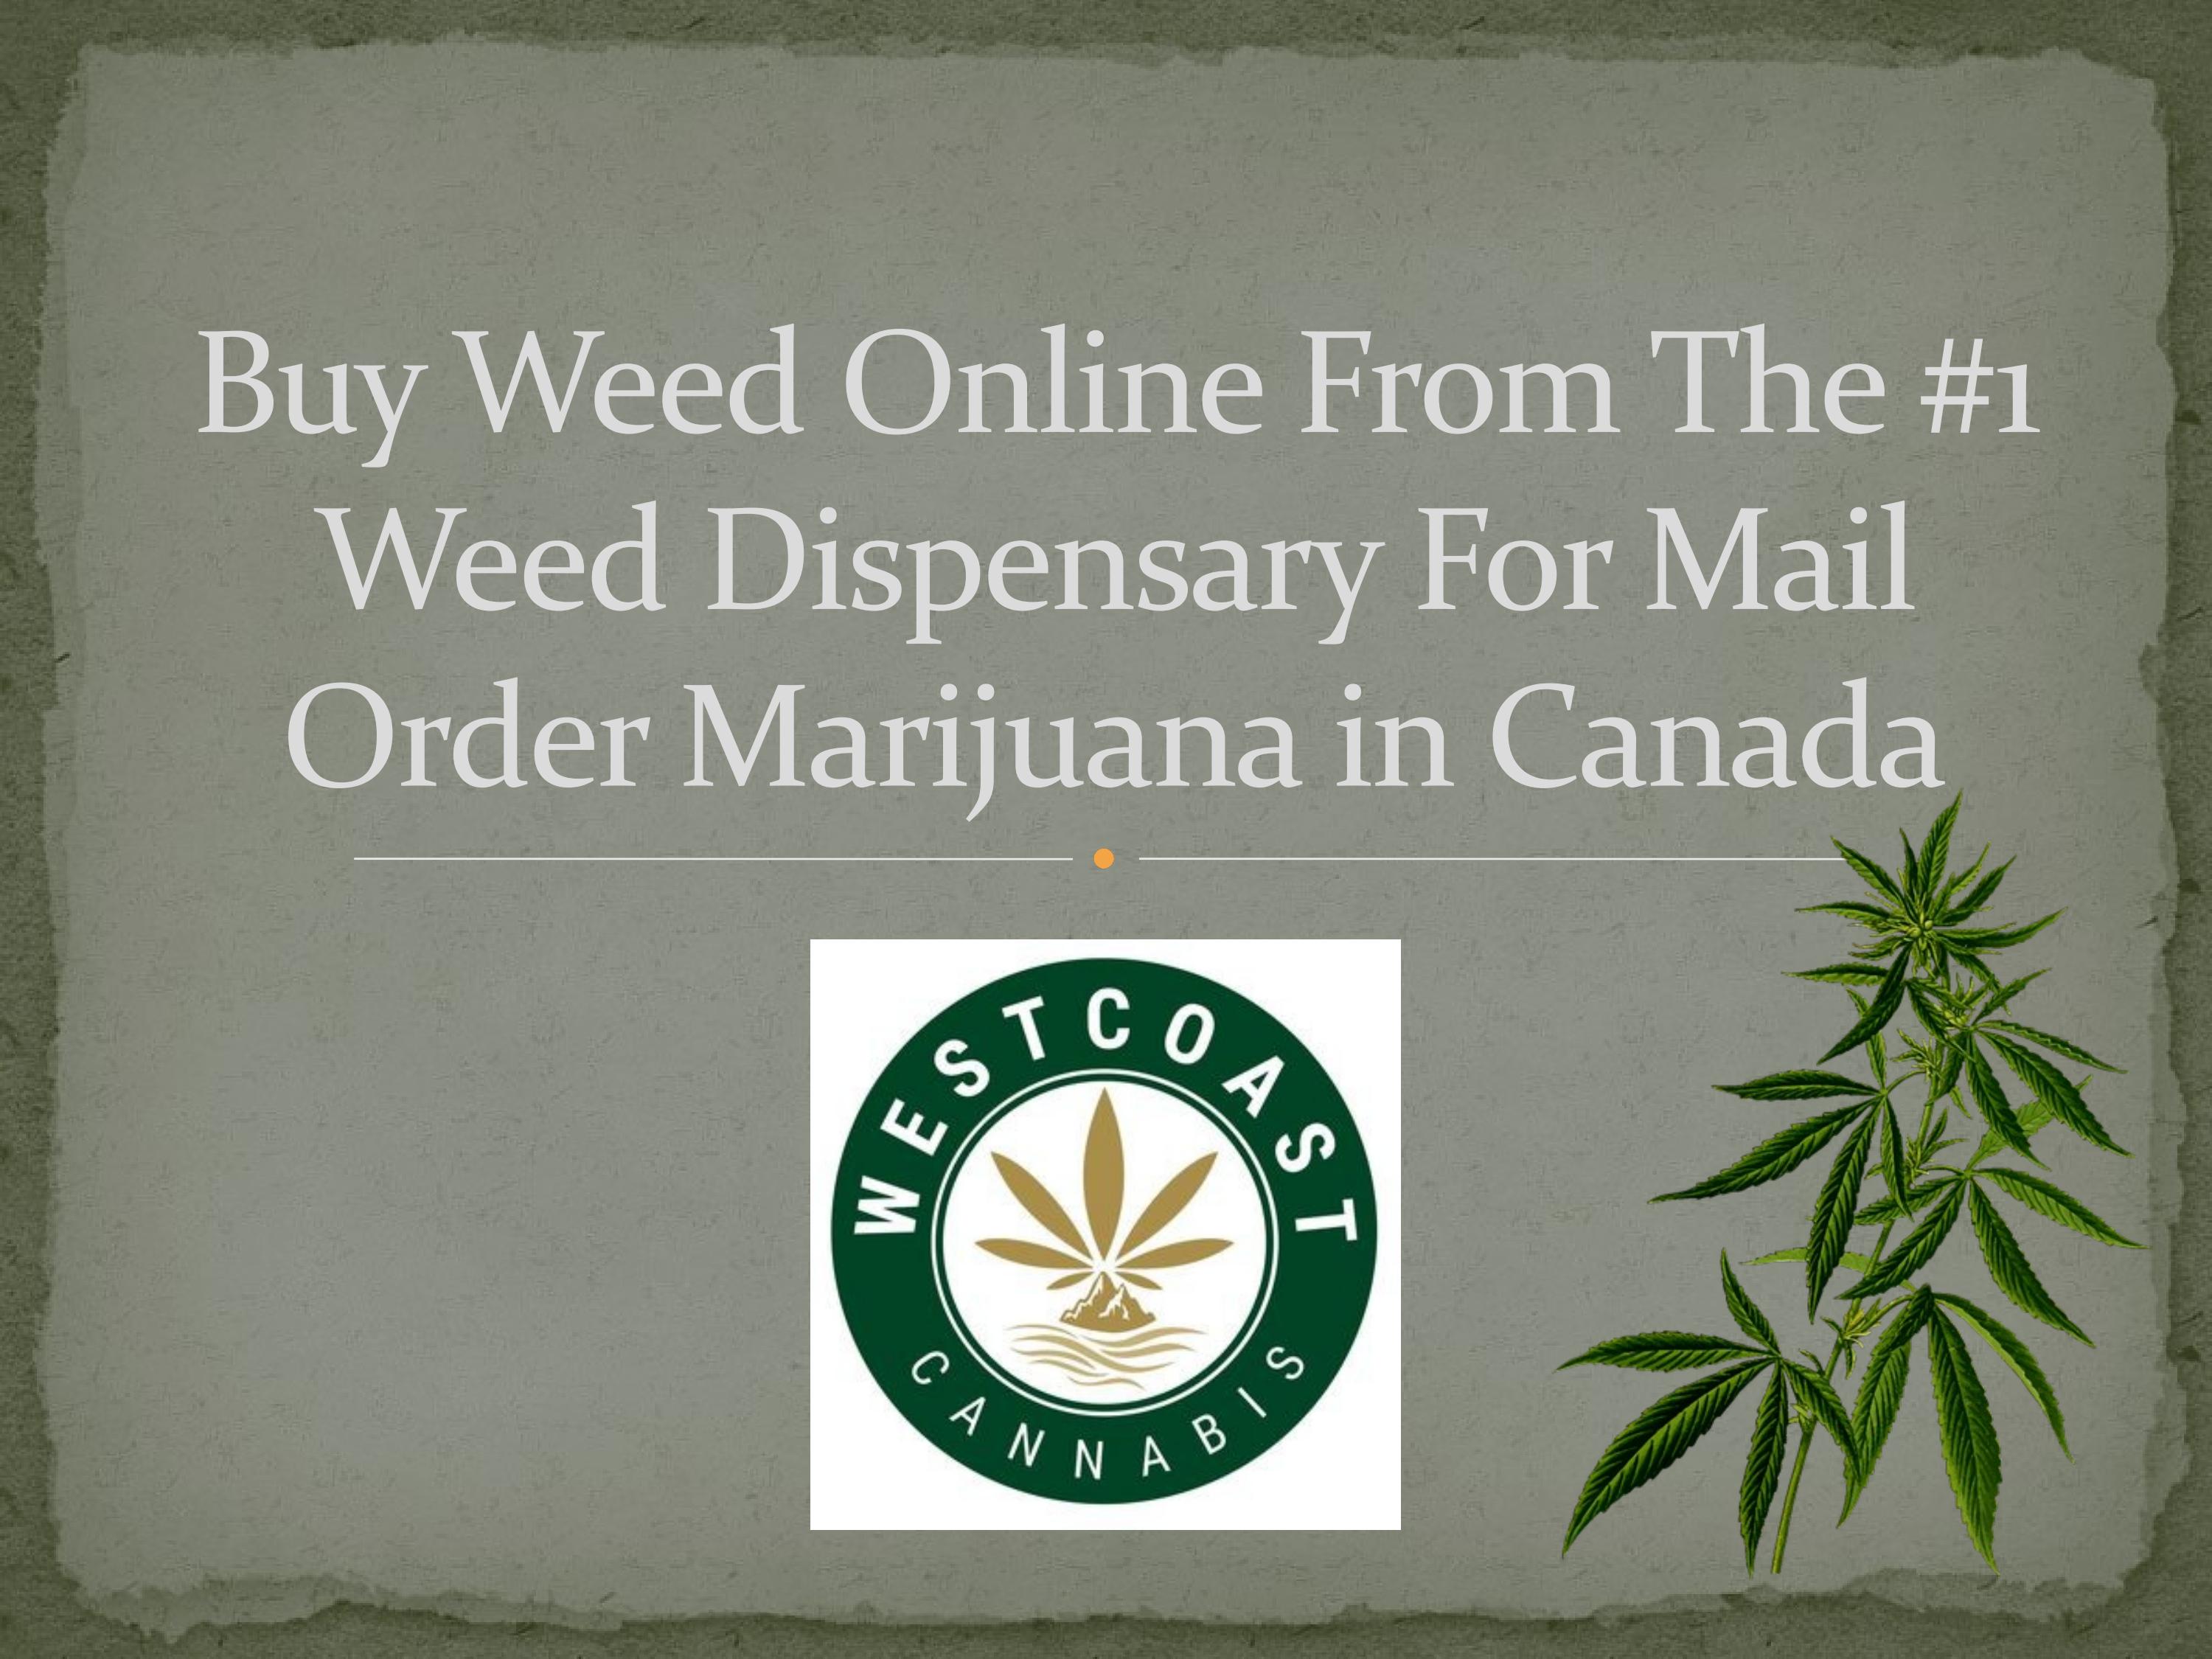 Buy Weed Online From The #1 Weed Dispensary For Mail Order Marijuana in Canada